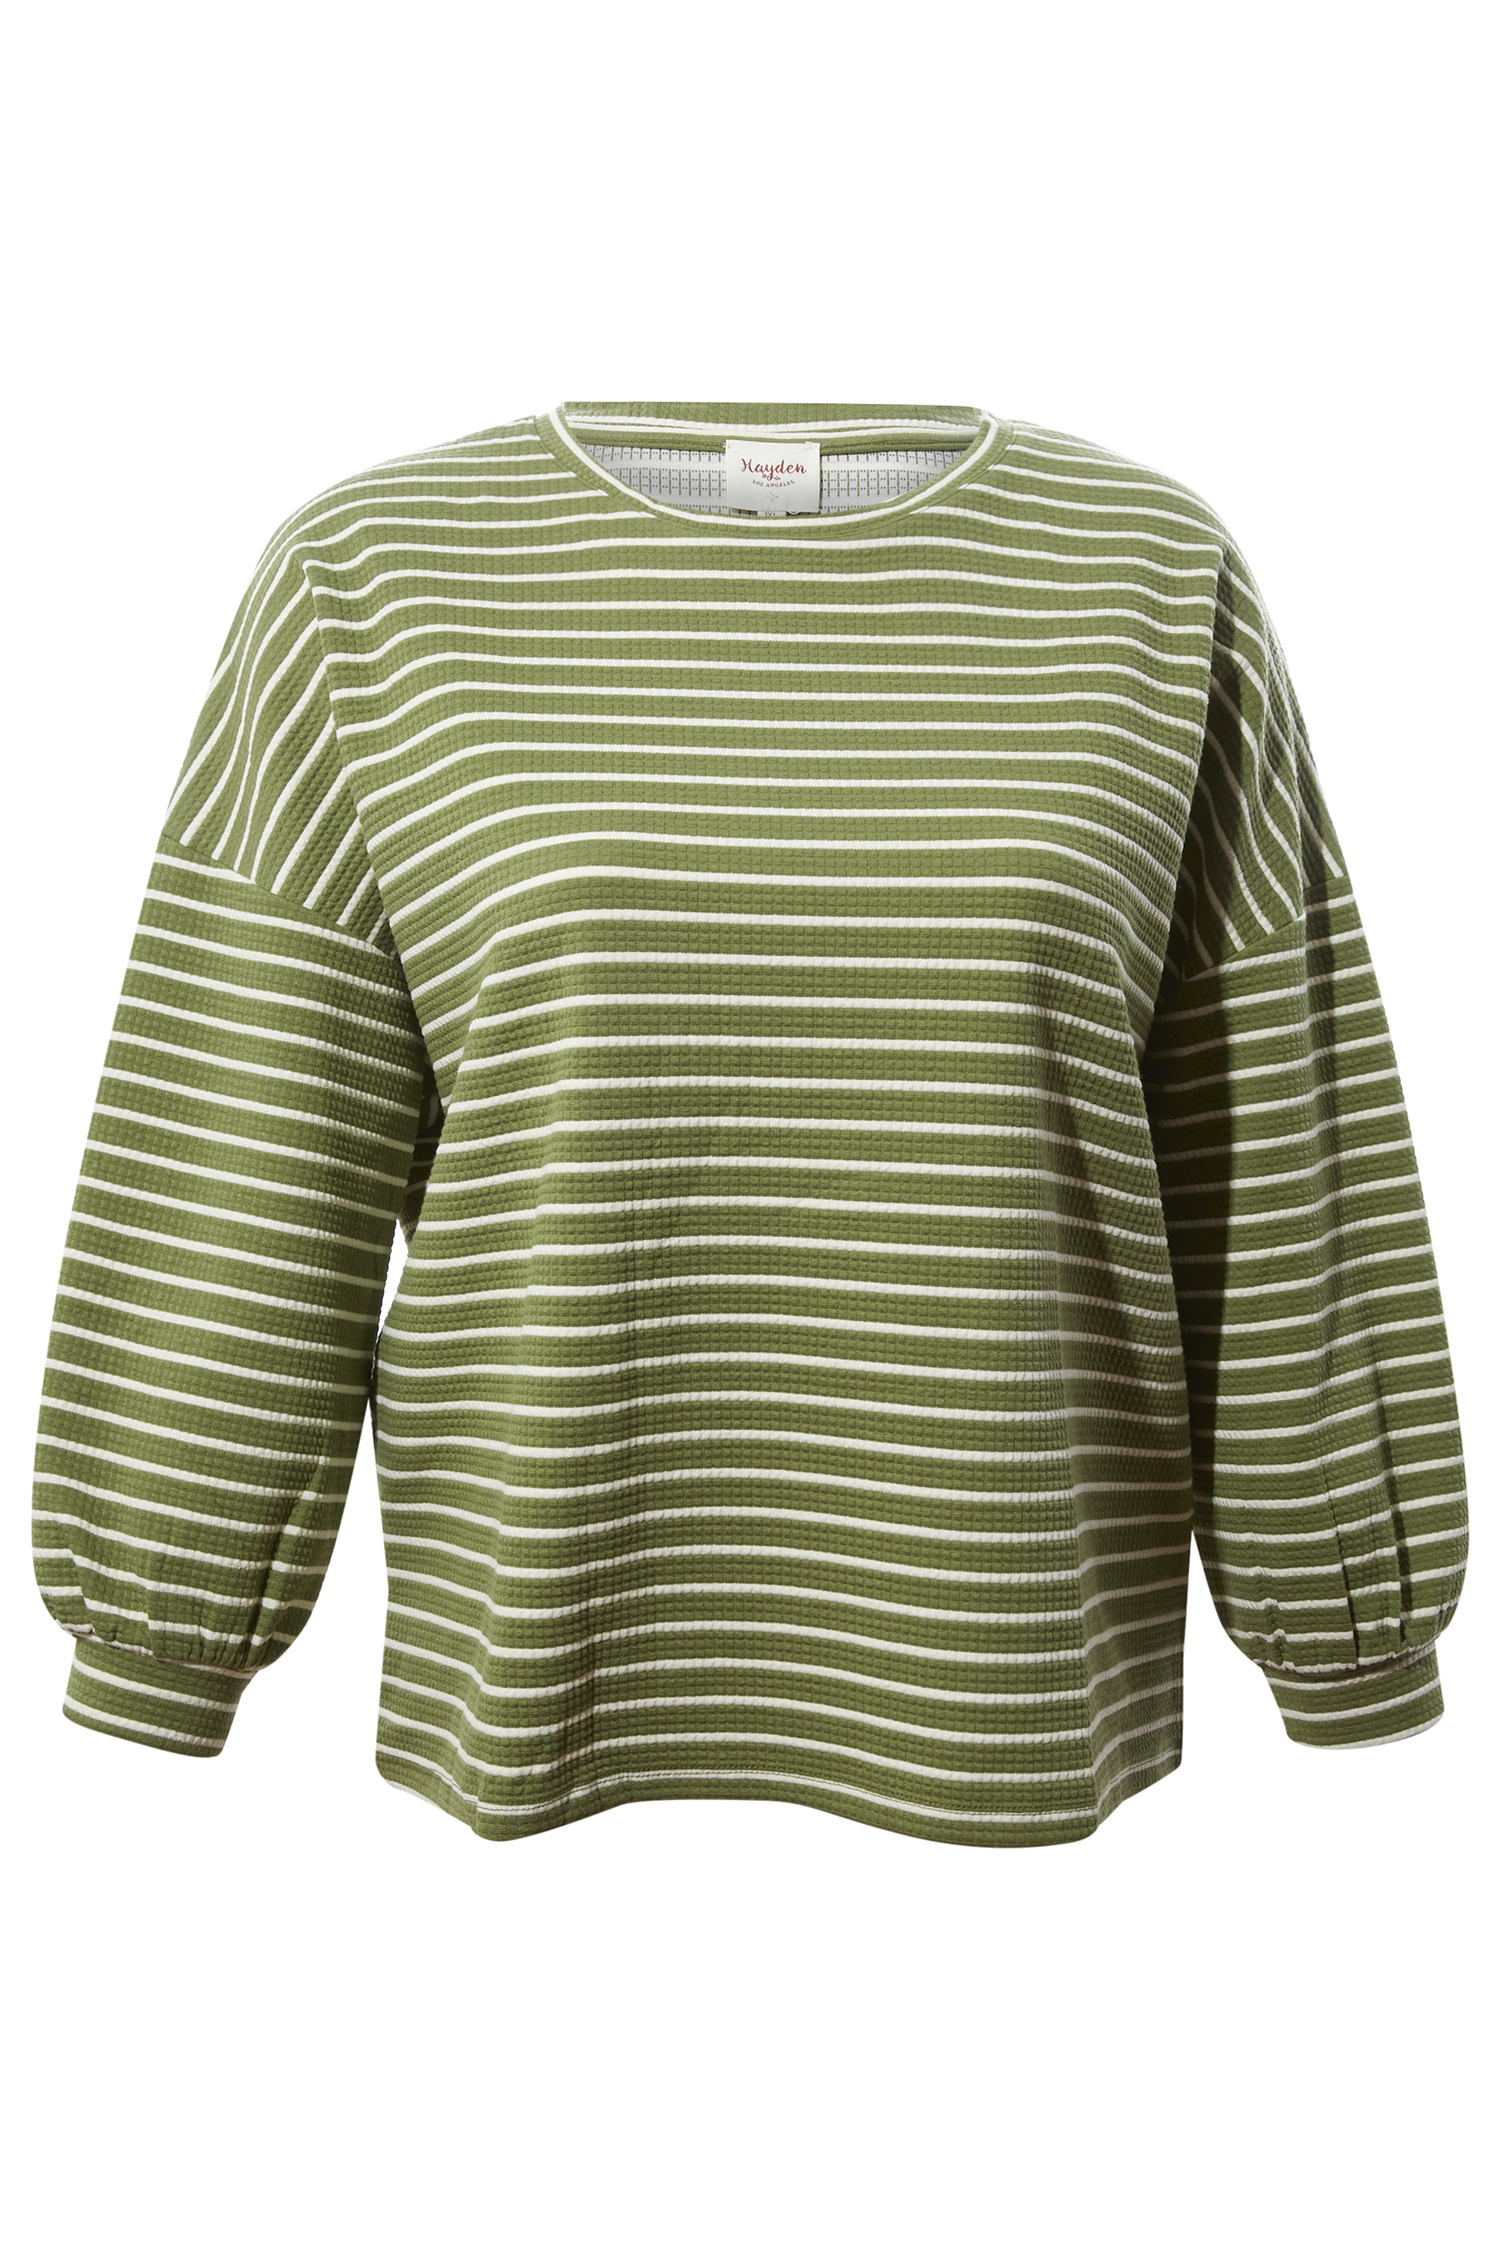 1X DAILYLOOK | Long Striped Sage T-Shirt in 3X - Sleeve